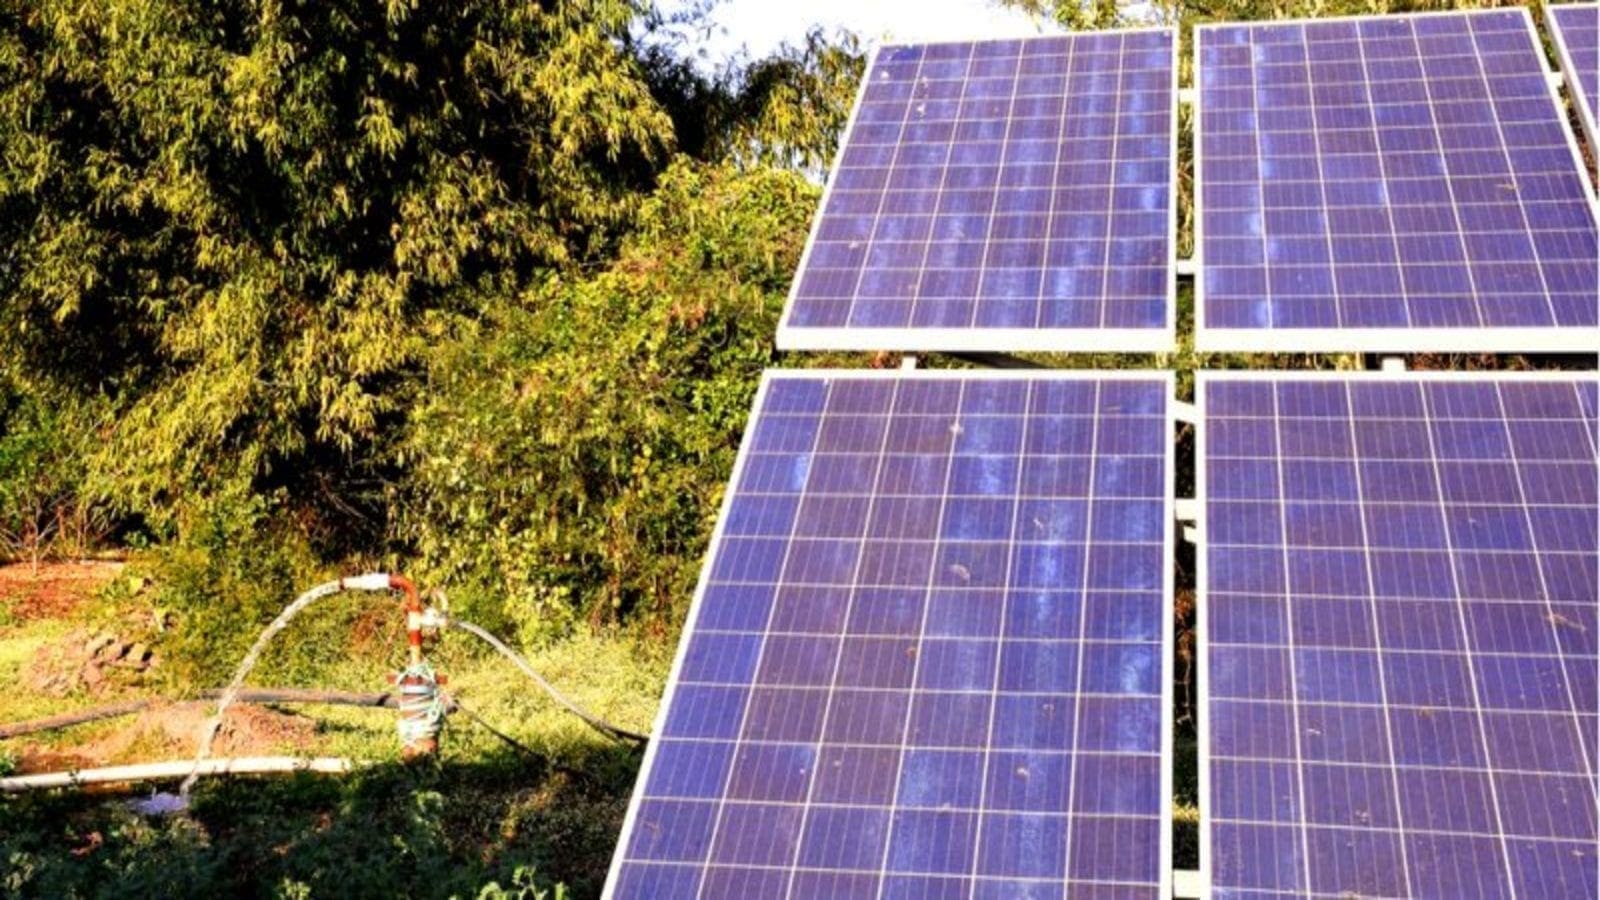 Kenyan energy startup SunCulture raises US$14m to finance distribution of solar power water pumps for irrigation